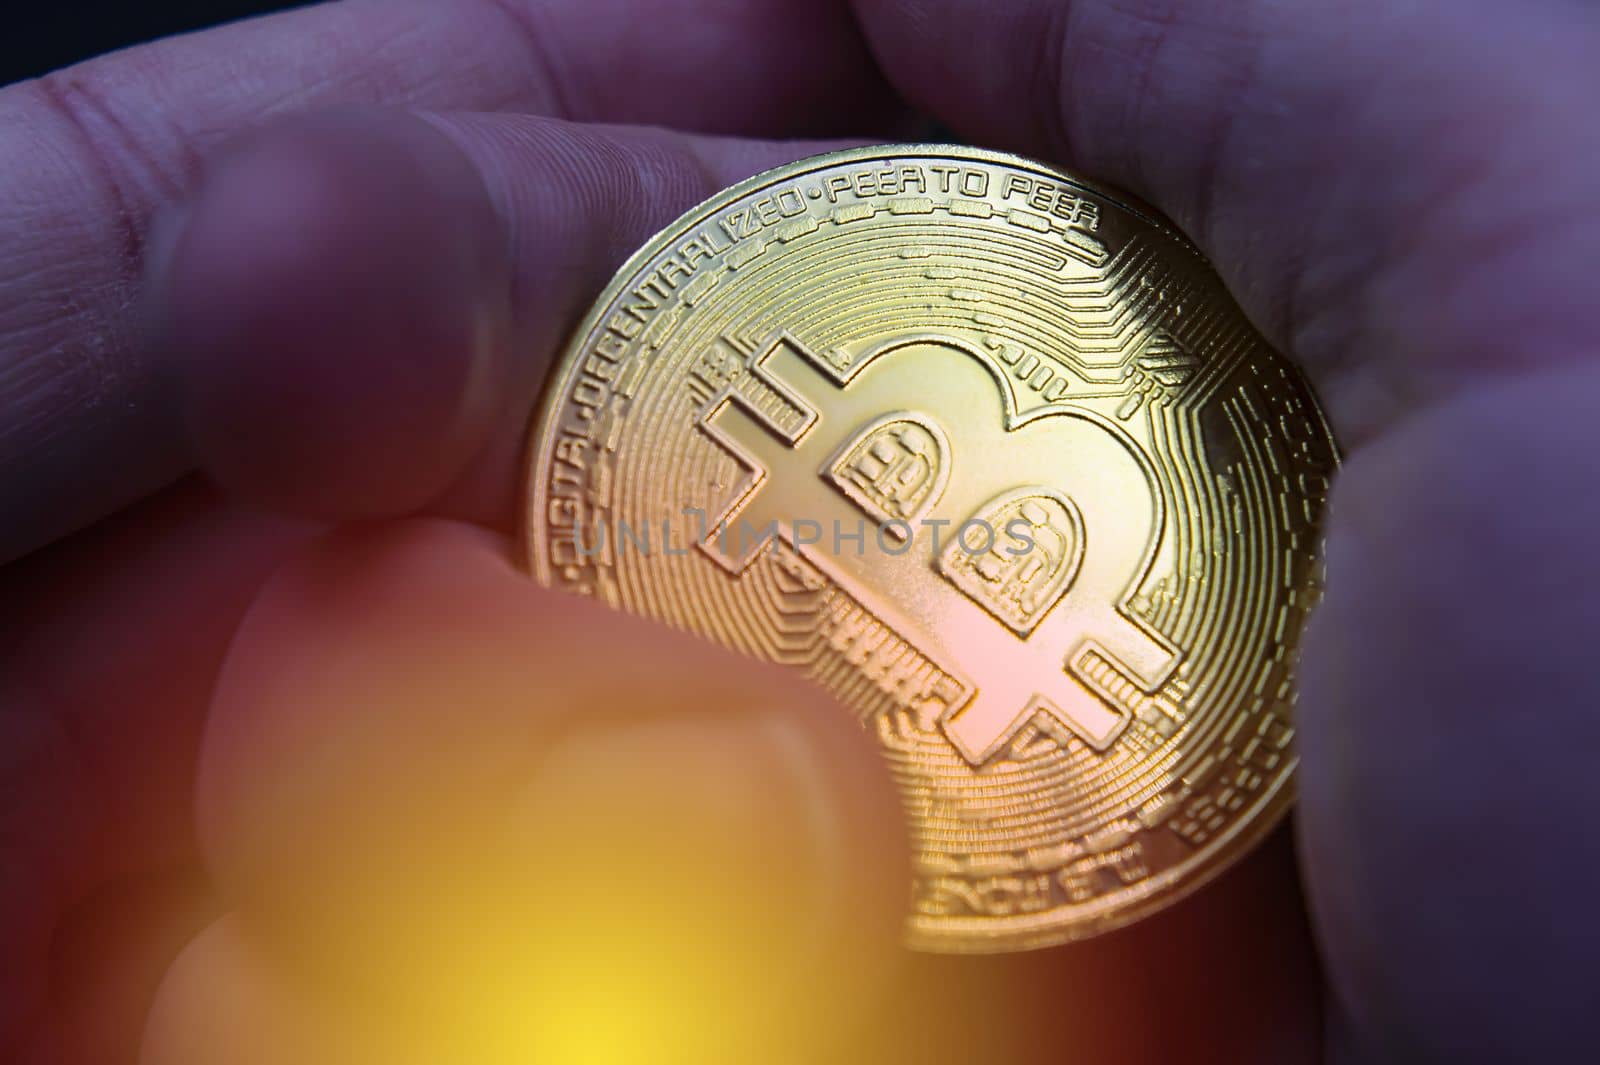 Finger hold bitcoin golden on black isolated. Hand hold gold bitcoin crypto ditital money concept. On a black background we look at a virtual currency, namely the cryptocurrency bitcoin, held in the right mine photo